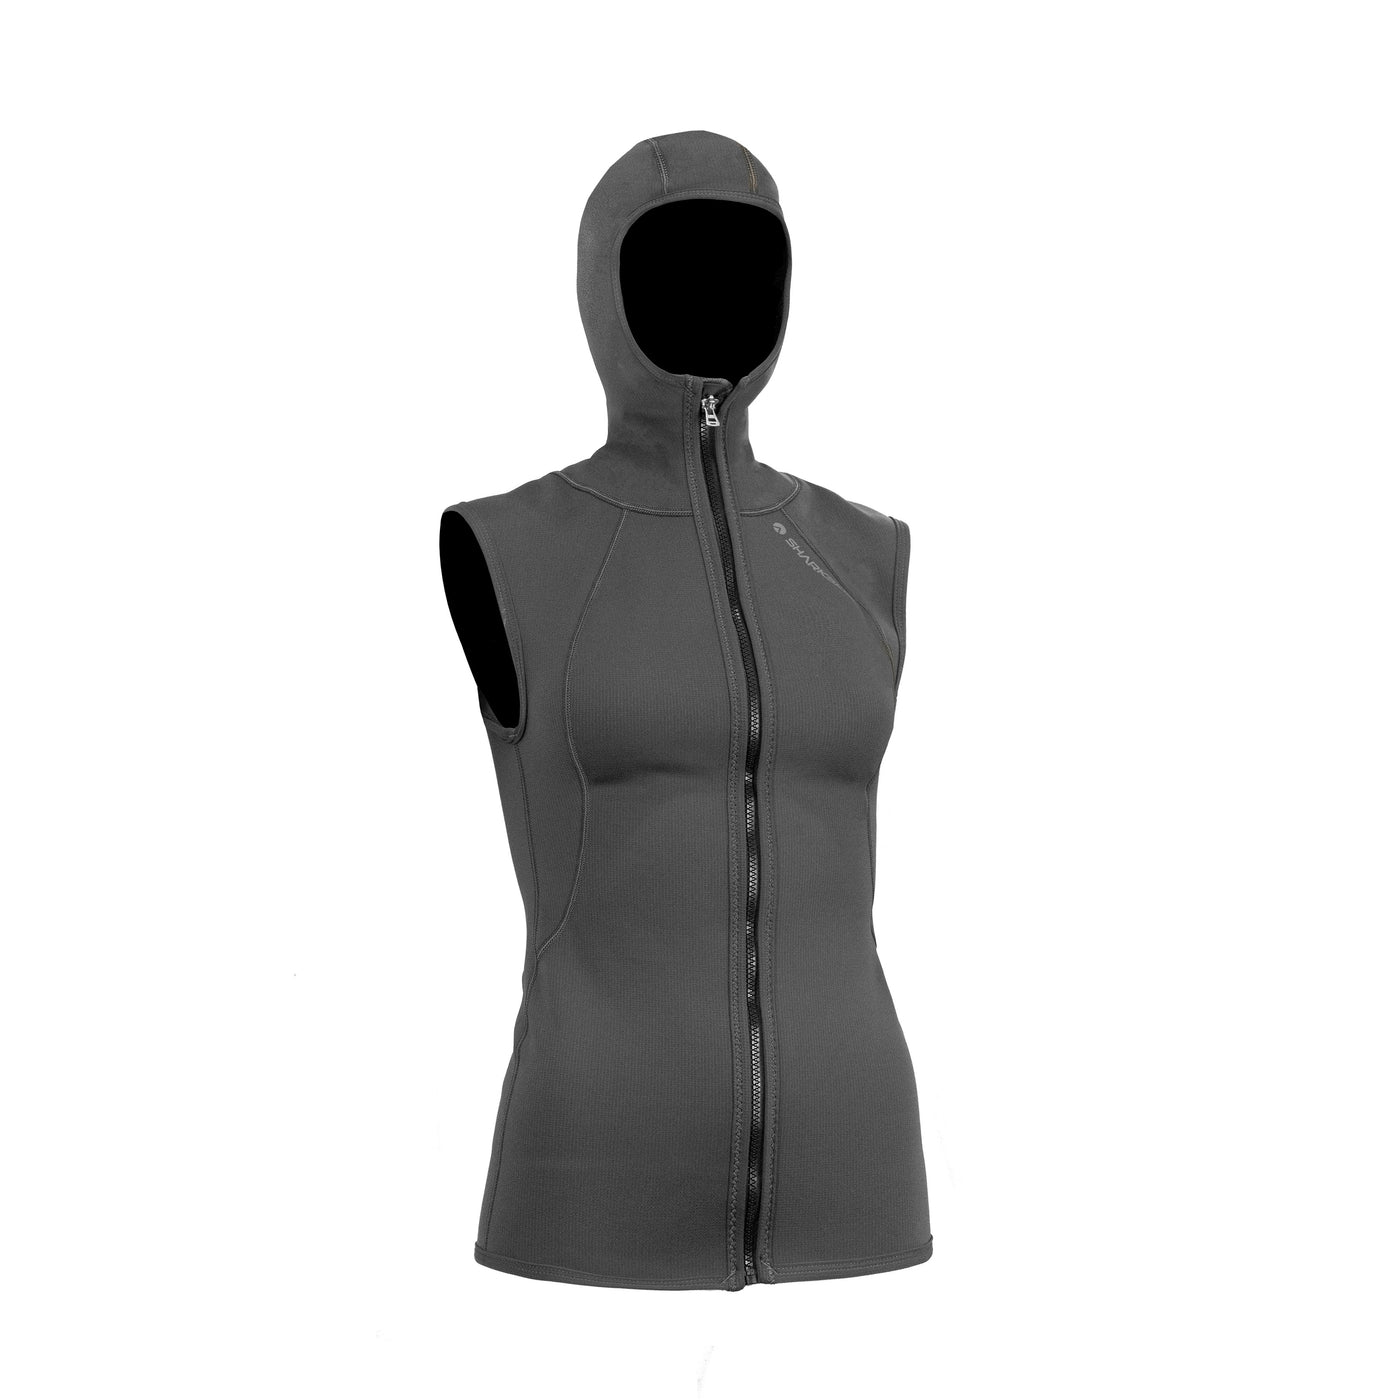 T2 CHILLPROOF FULL ZIP VEST WITH HOOD - WOMENS (SECONDS)